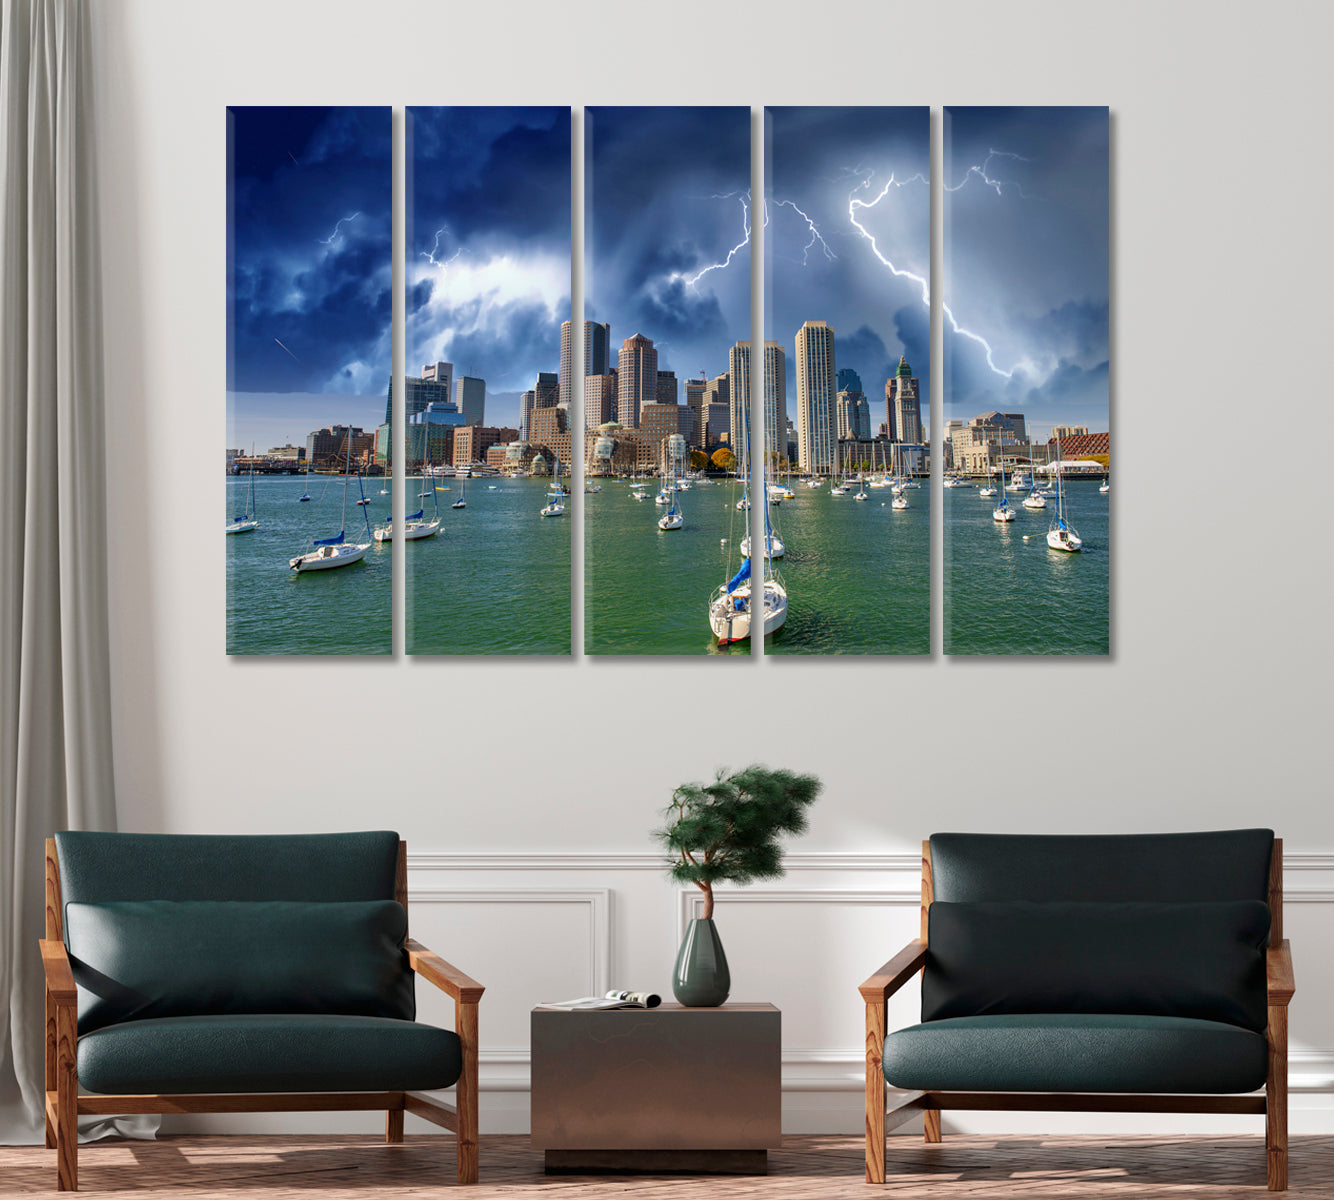 Boston Skyline and Boats Under an Impending Storm Canvas Print-Canvas Print-CetArt-1 Panel-24x16 inches-CetArt